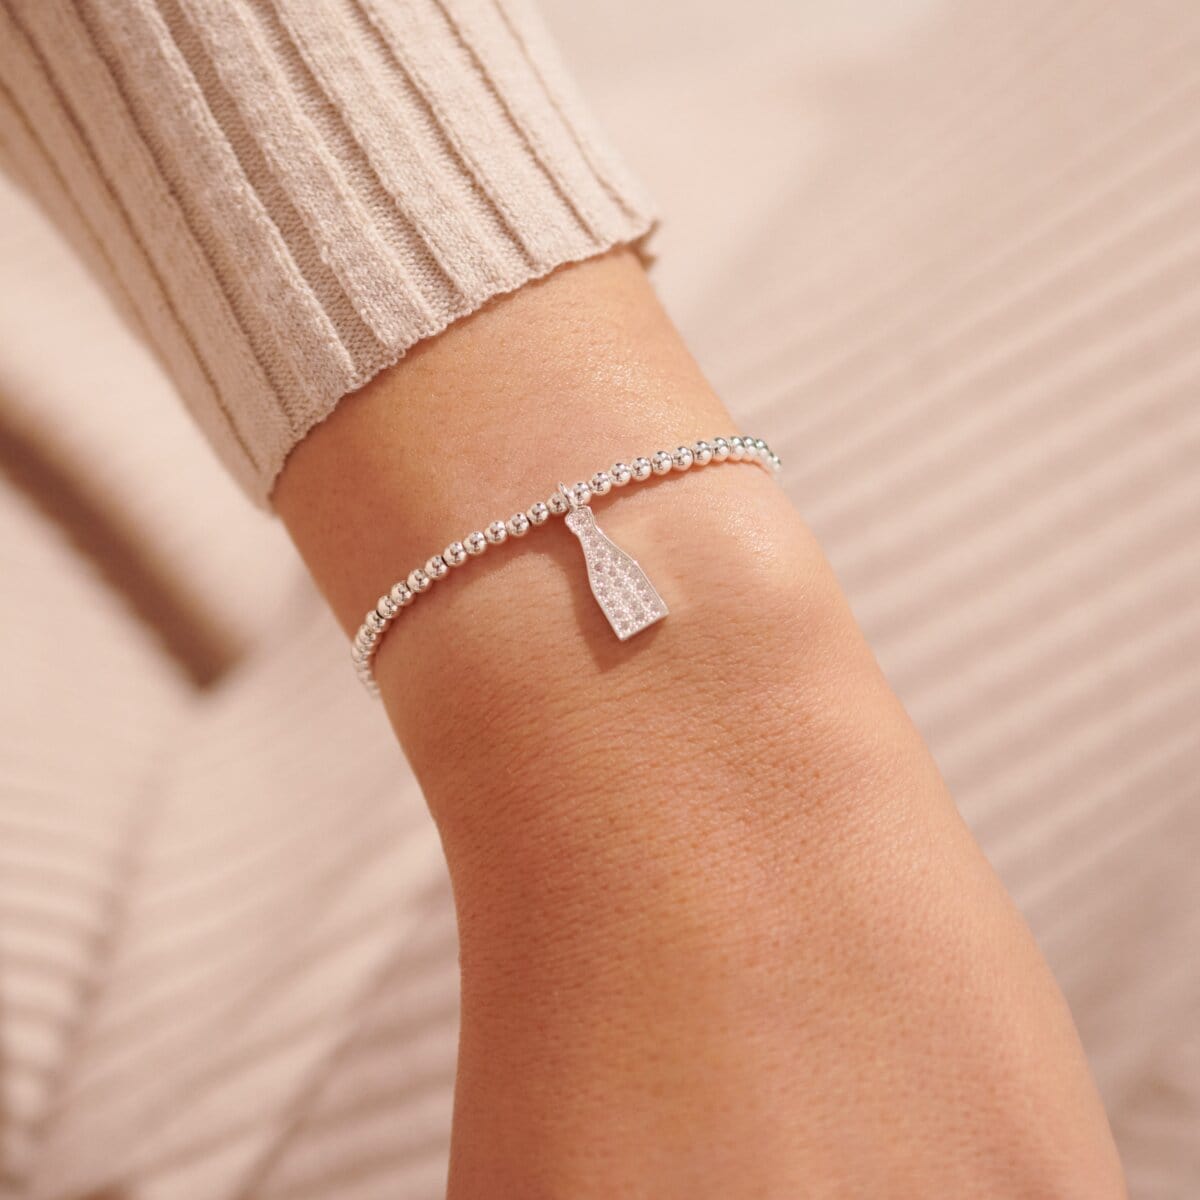 Joma Jewellery Bracelet Joma Jewellery Bracelet - A Little This Calls For Champagne